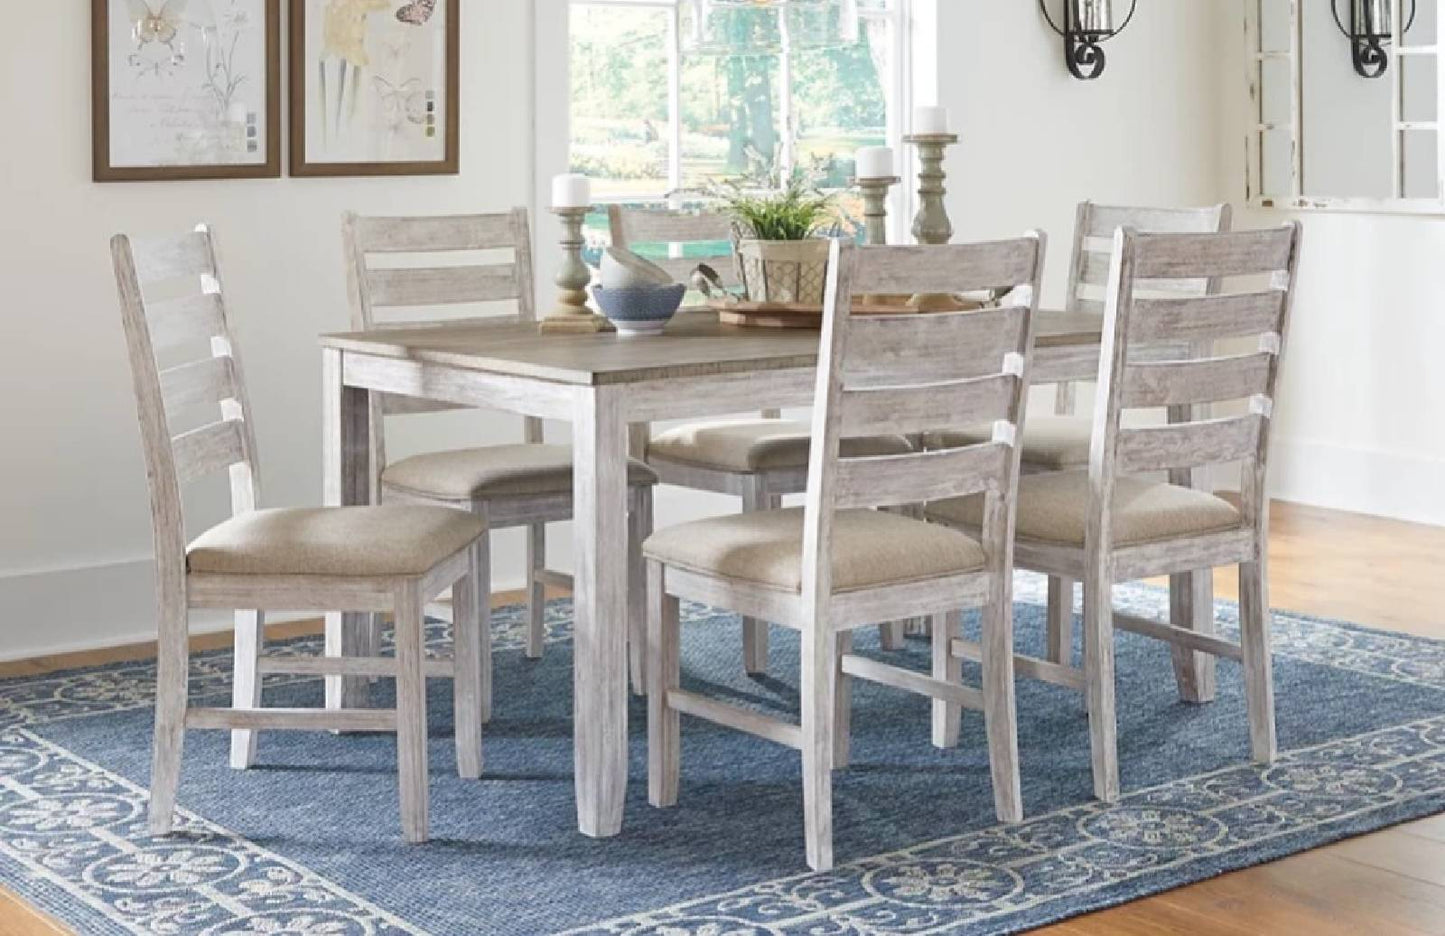 Ashley D394-425 Skempton (Table and 6 Chairs)